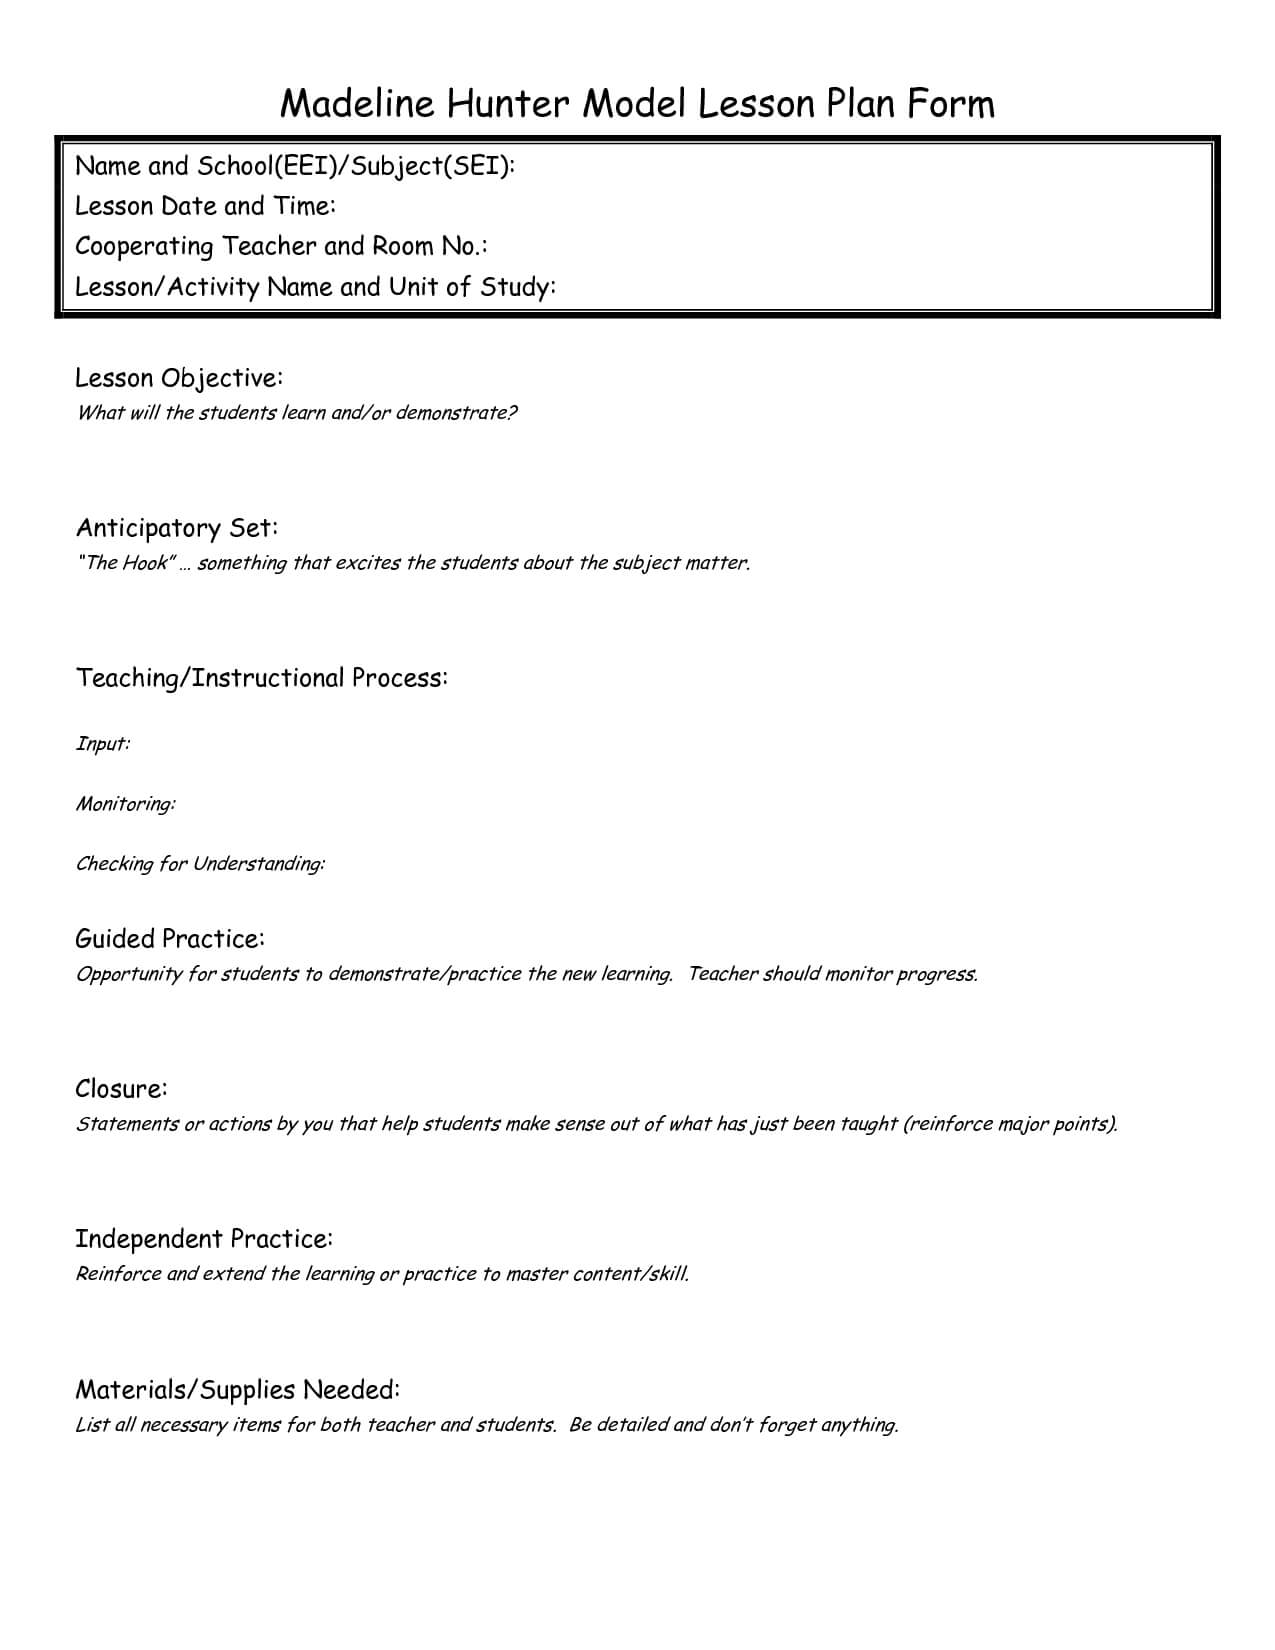 Eei Lesson Plan | Lesson Plan Format, Madeline Hunter Lesson For Madeline Hunter Lesson Plan Template Word